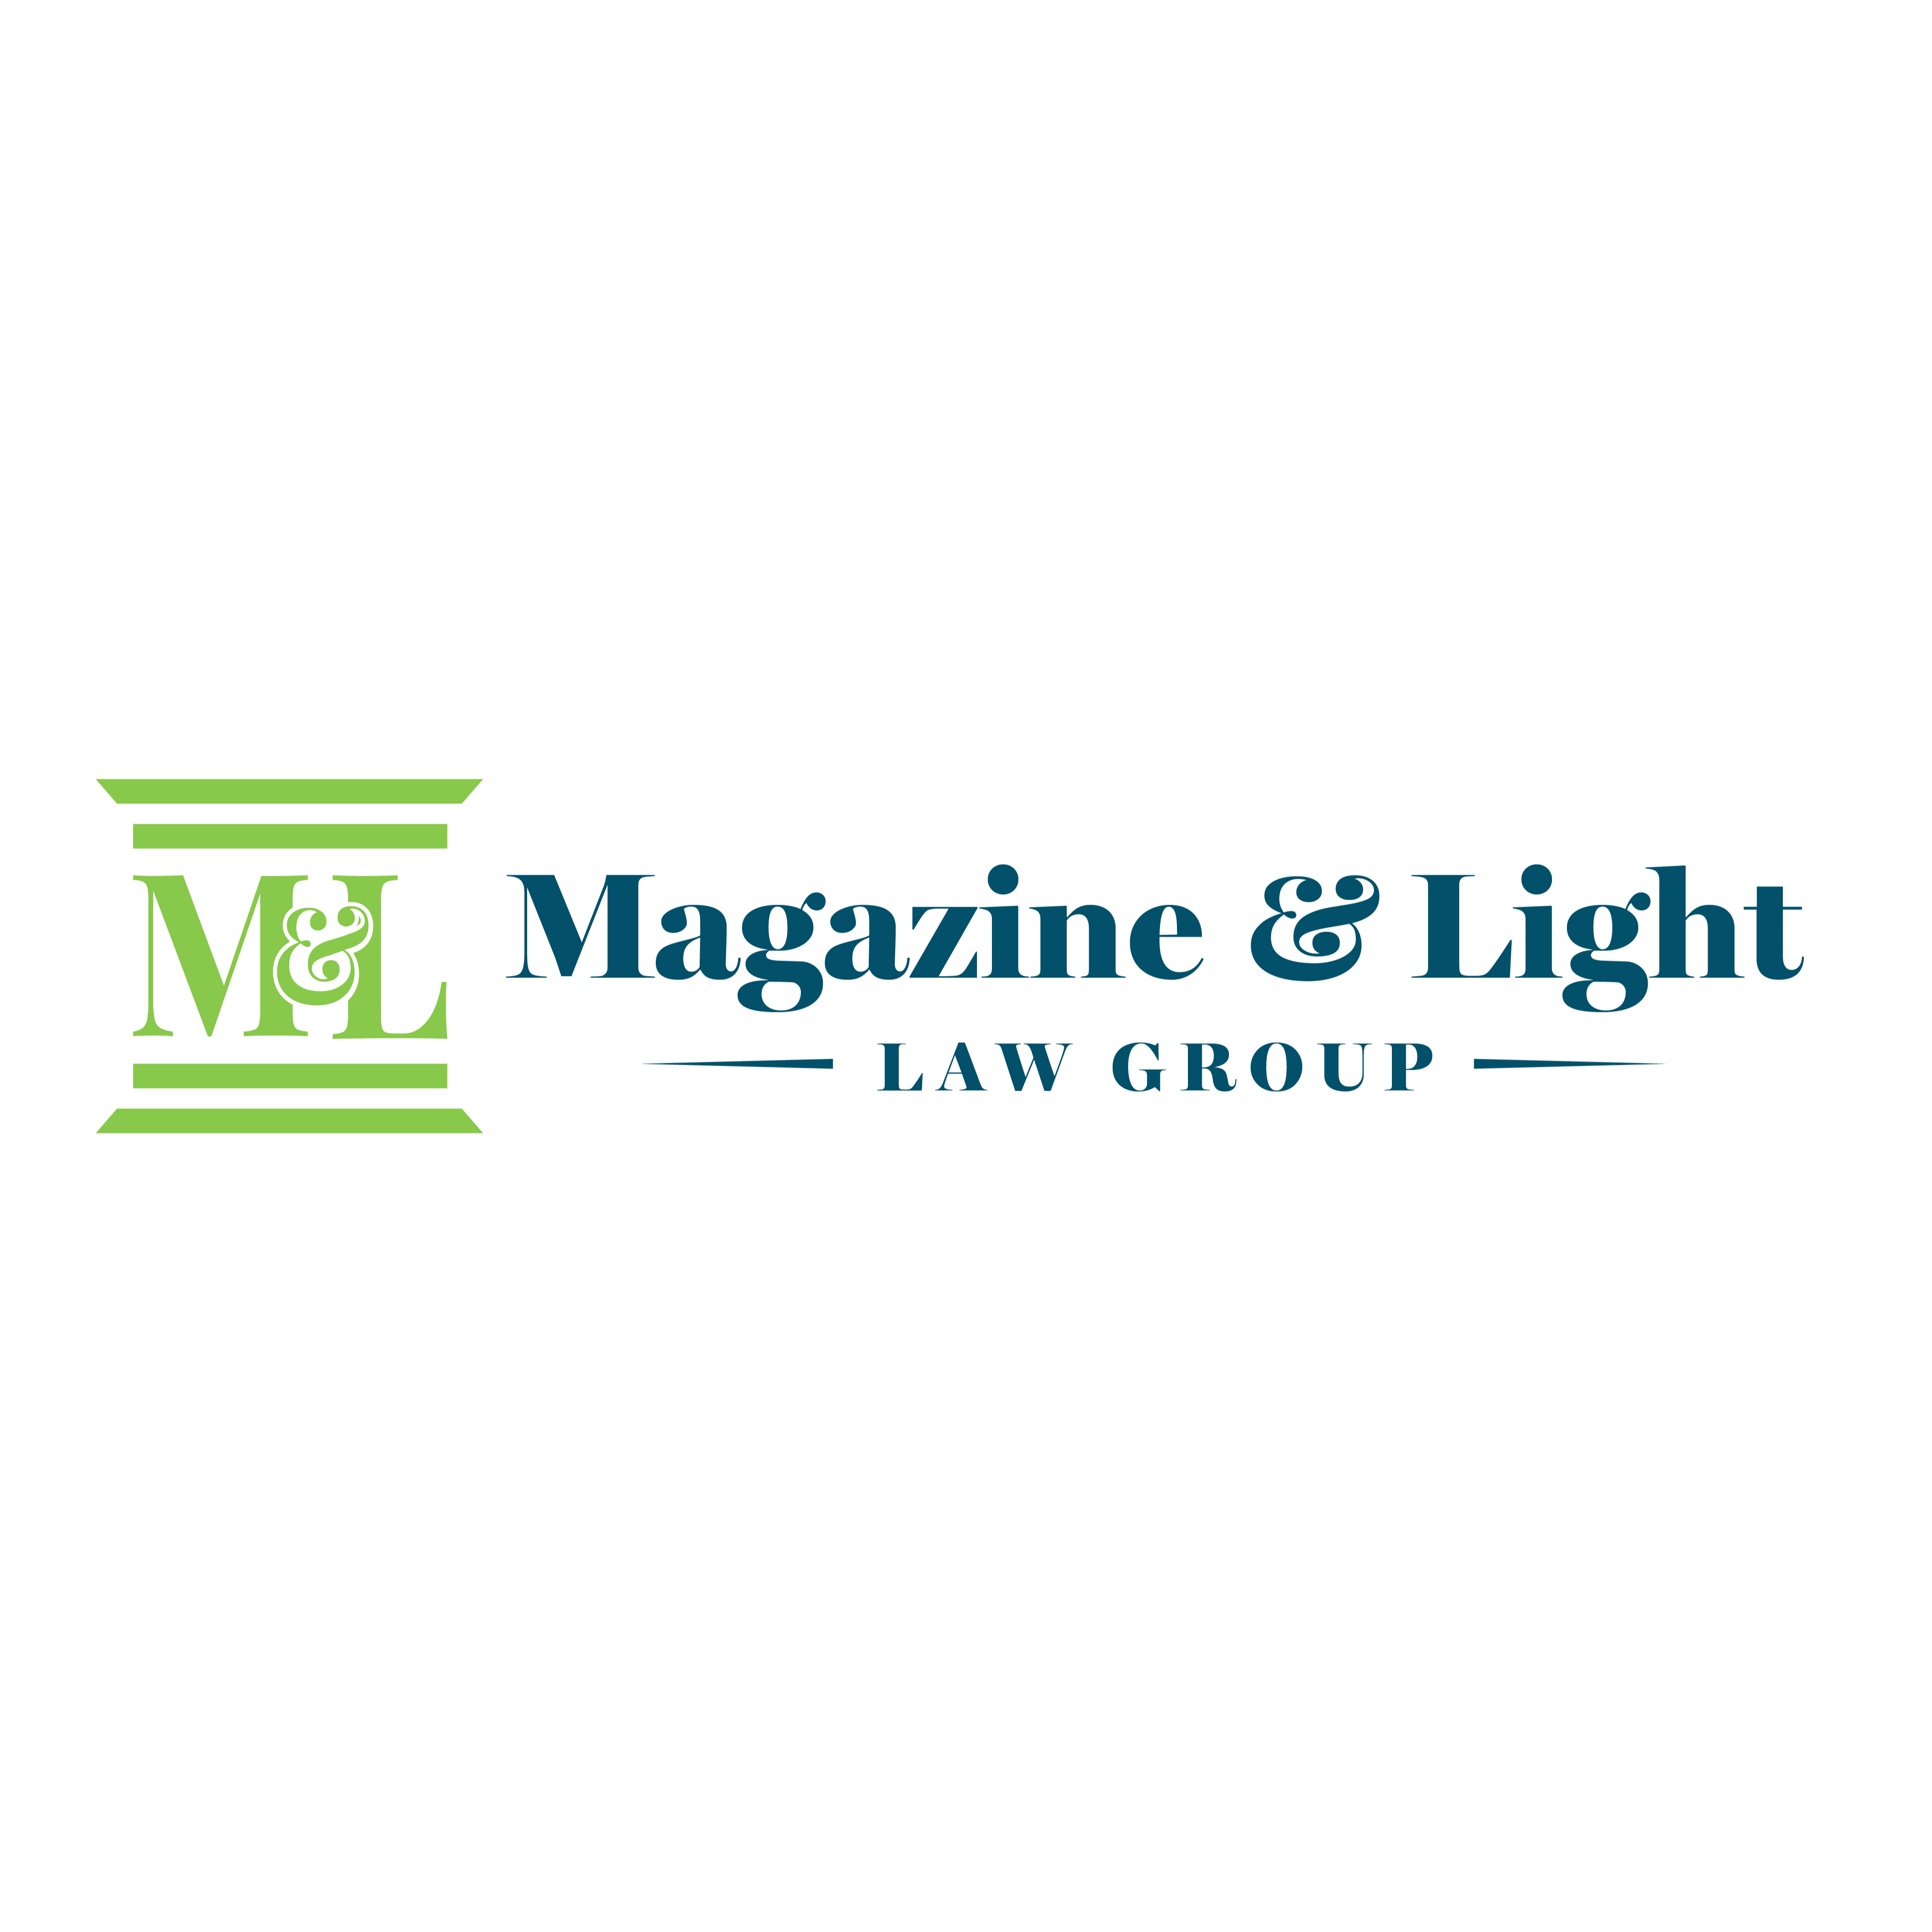 Magazine & Light Law Group - Clearwater, FL 33759 - (727)499-9900 | ShowMeLocal.com